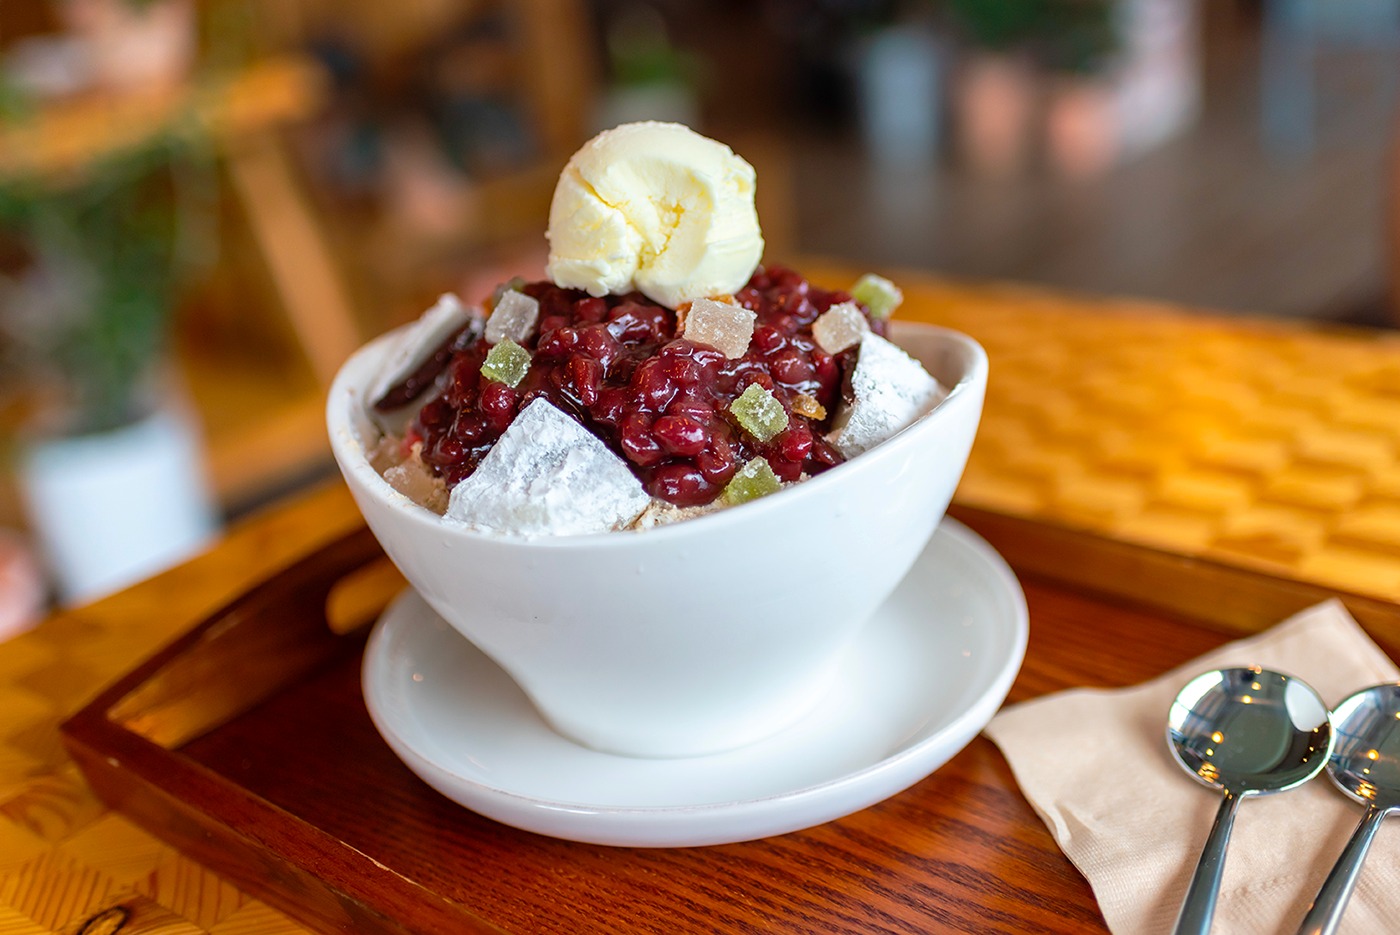 Eat at a Global Food Extravaganza to Determine the Season That Best Represents You Patbingsu (Korean shaved ice)